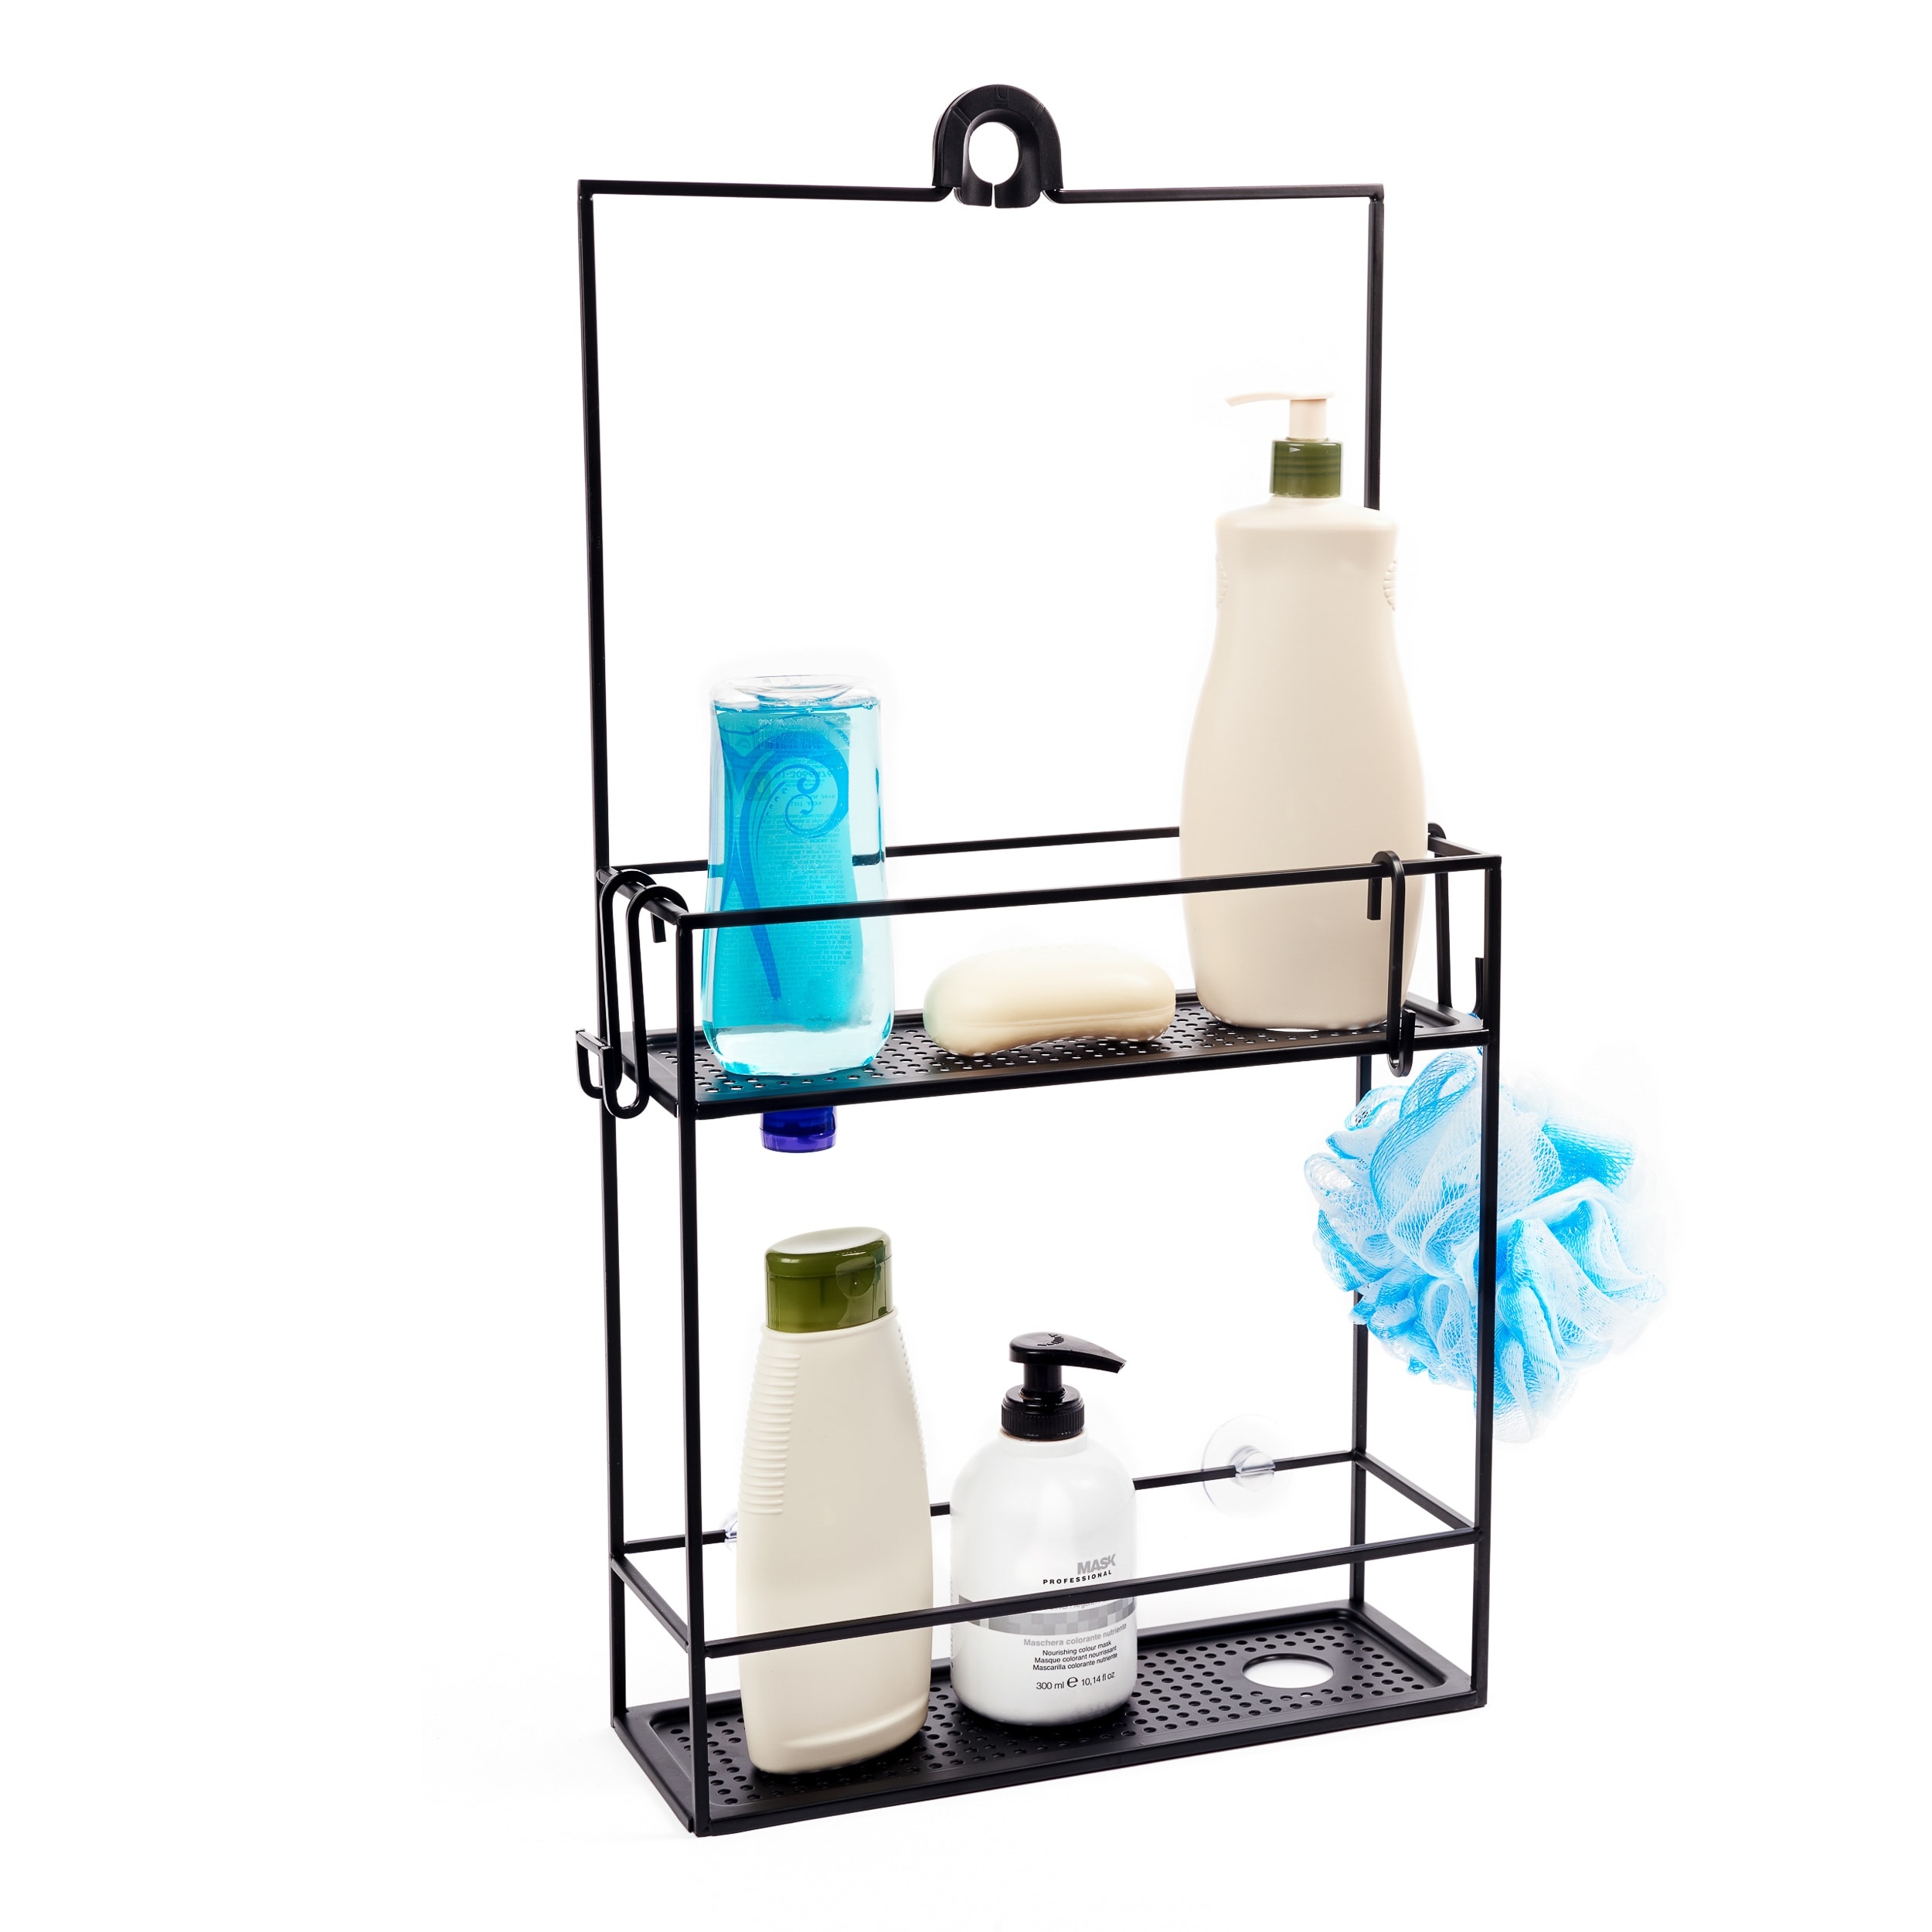 https://ak1.ostkcdn.com/images/products/is/images/direct/8bf78d09e3fc22dccbe27f0c777eff2bc57e962f/Umbra-CUBIKO-Shower-Caddy.jpg